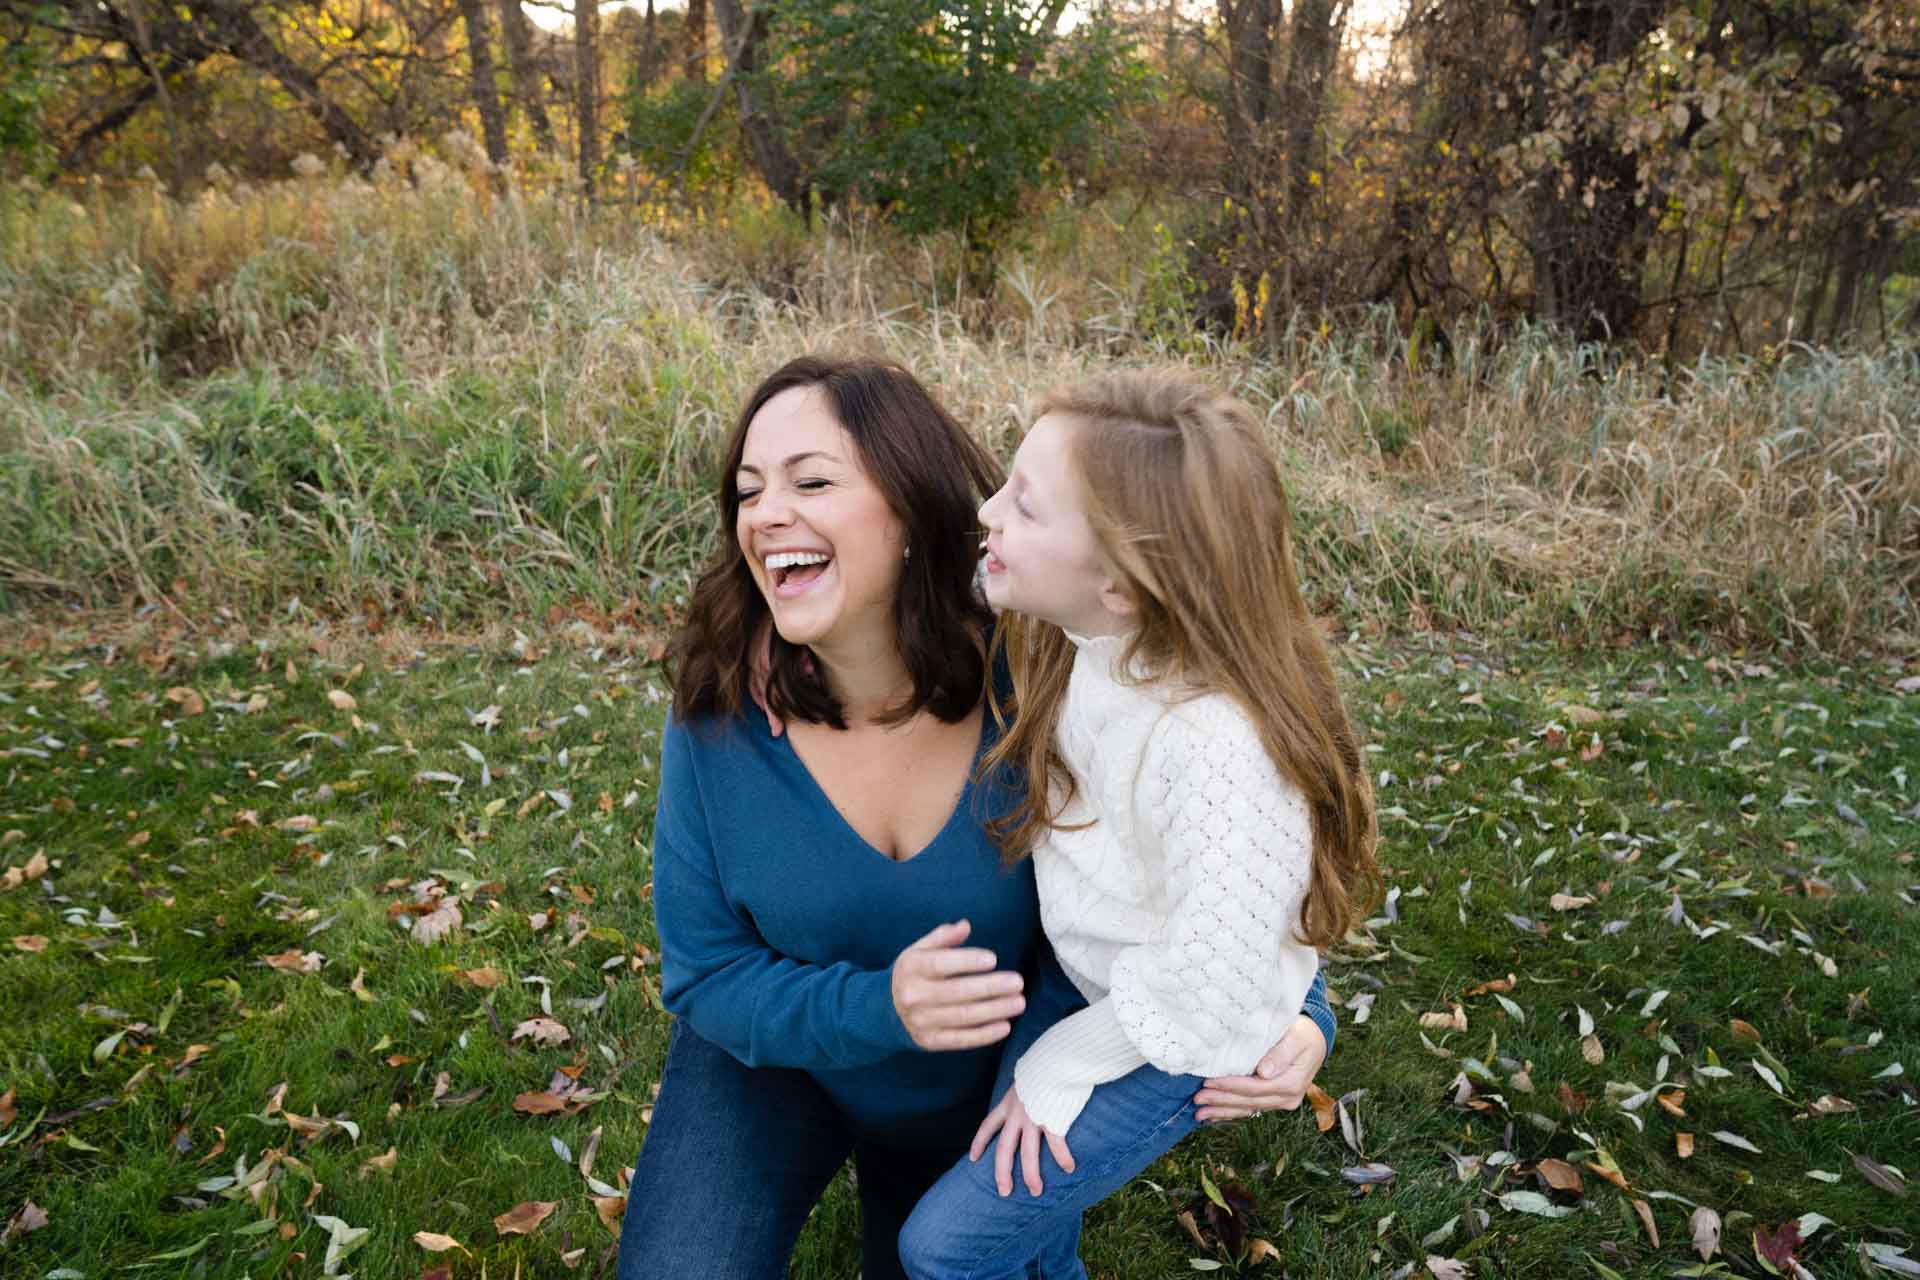 mom and daughter laughing and smiling wearing blue and white during a fall photo session